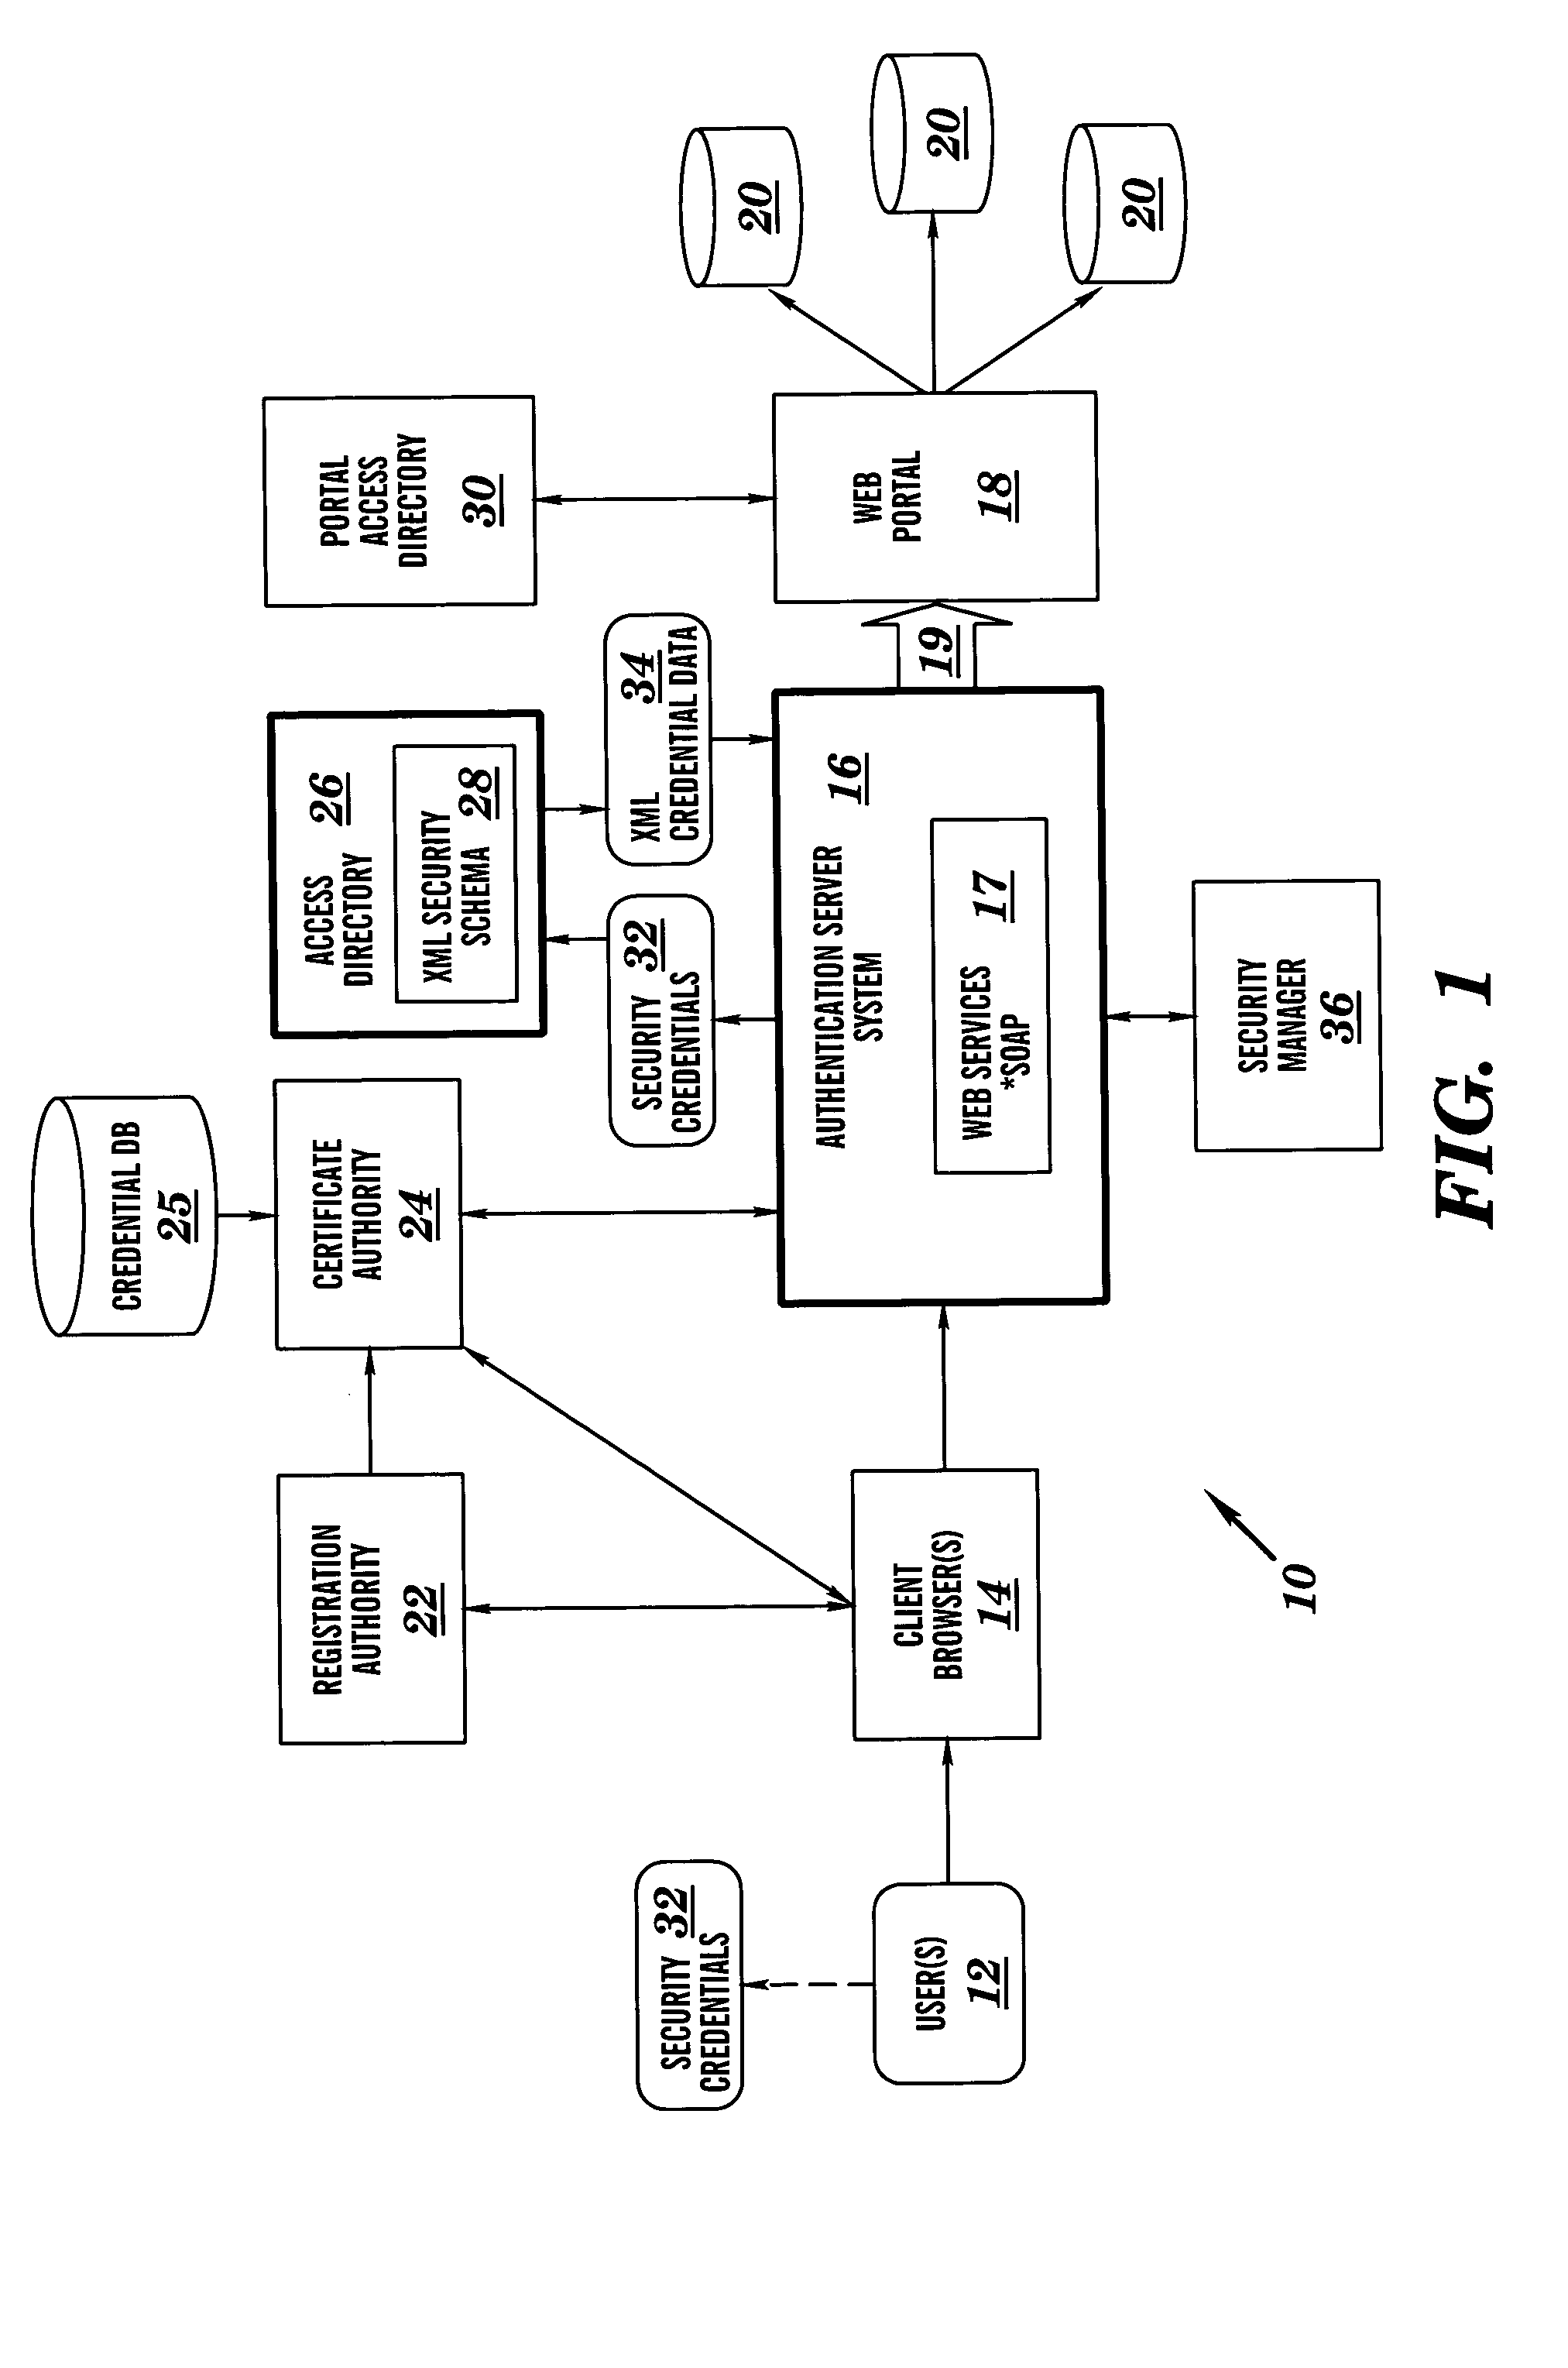 Multi-level multi-user web services security system and method